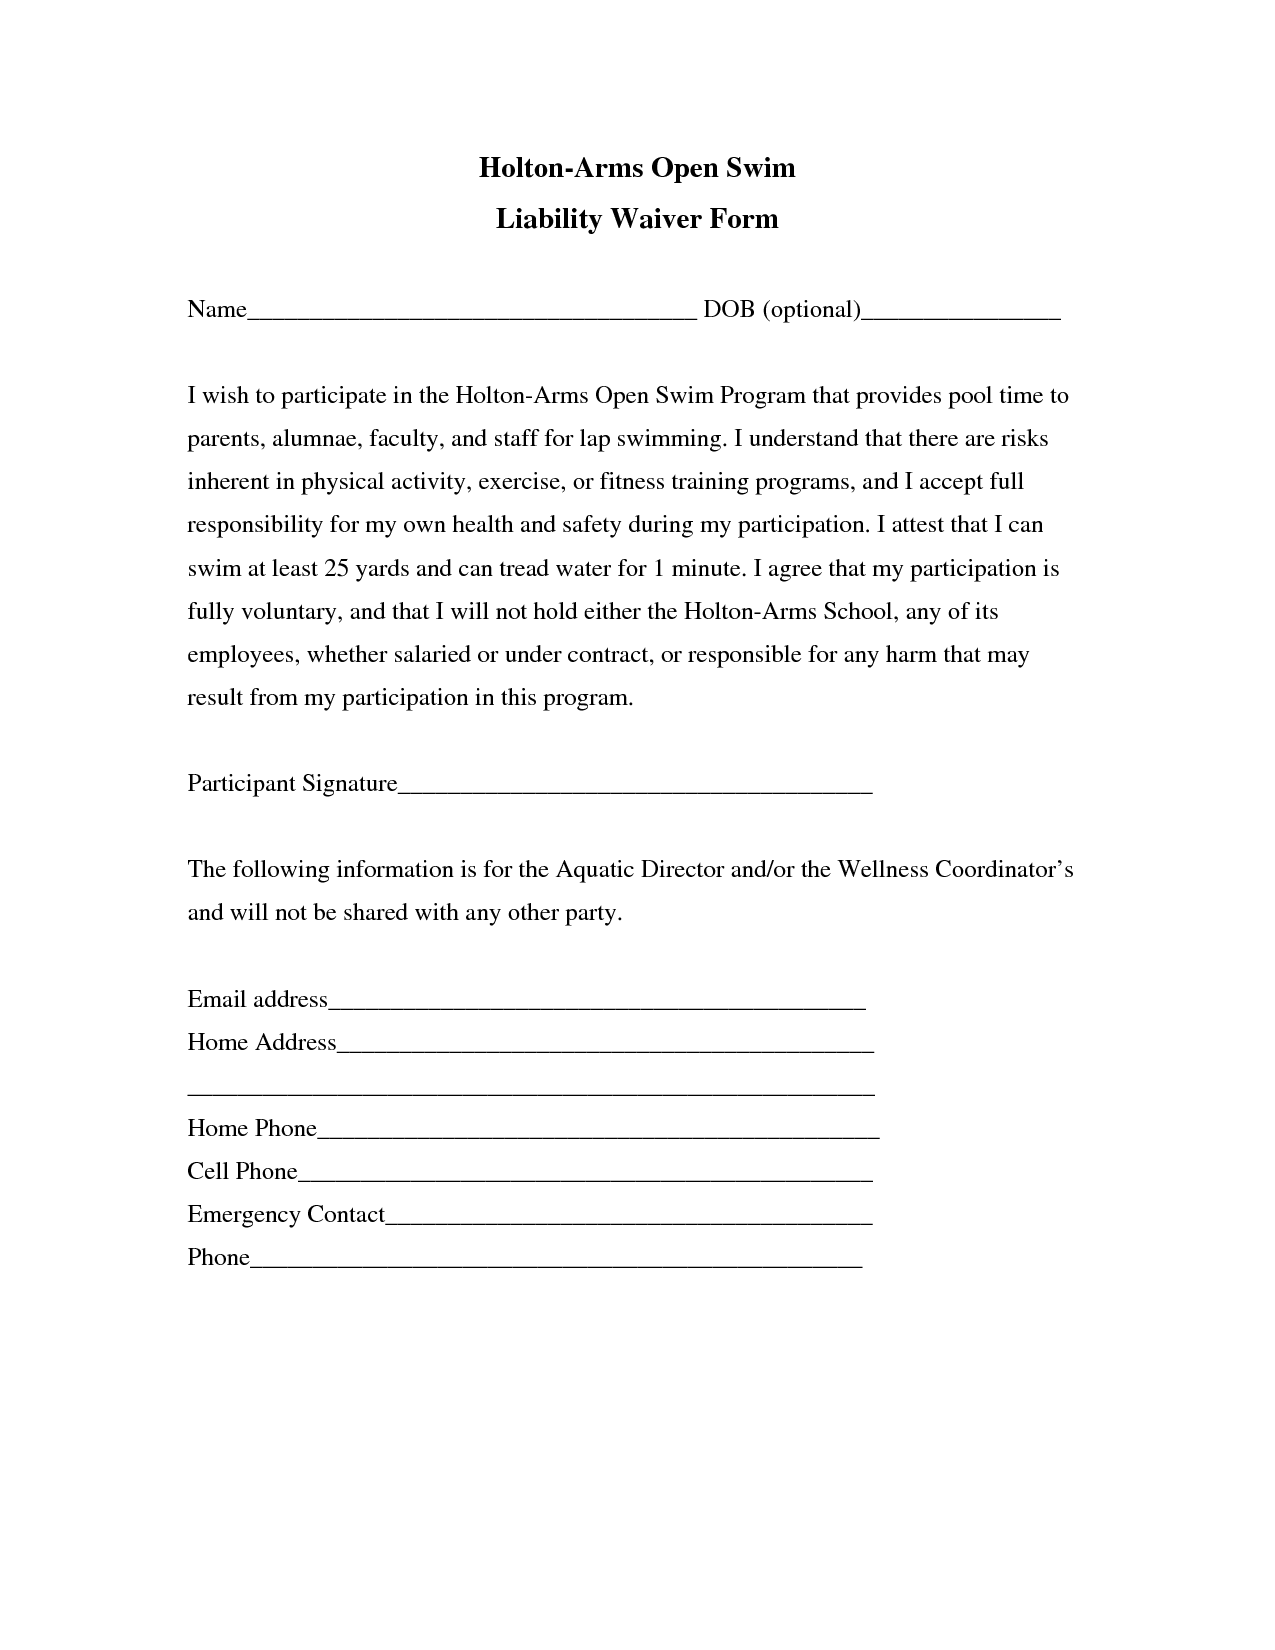 liability-waiver-sample-free-printable-documents